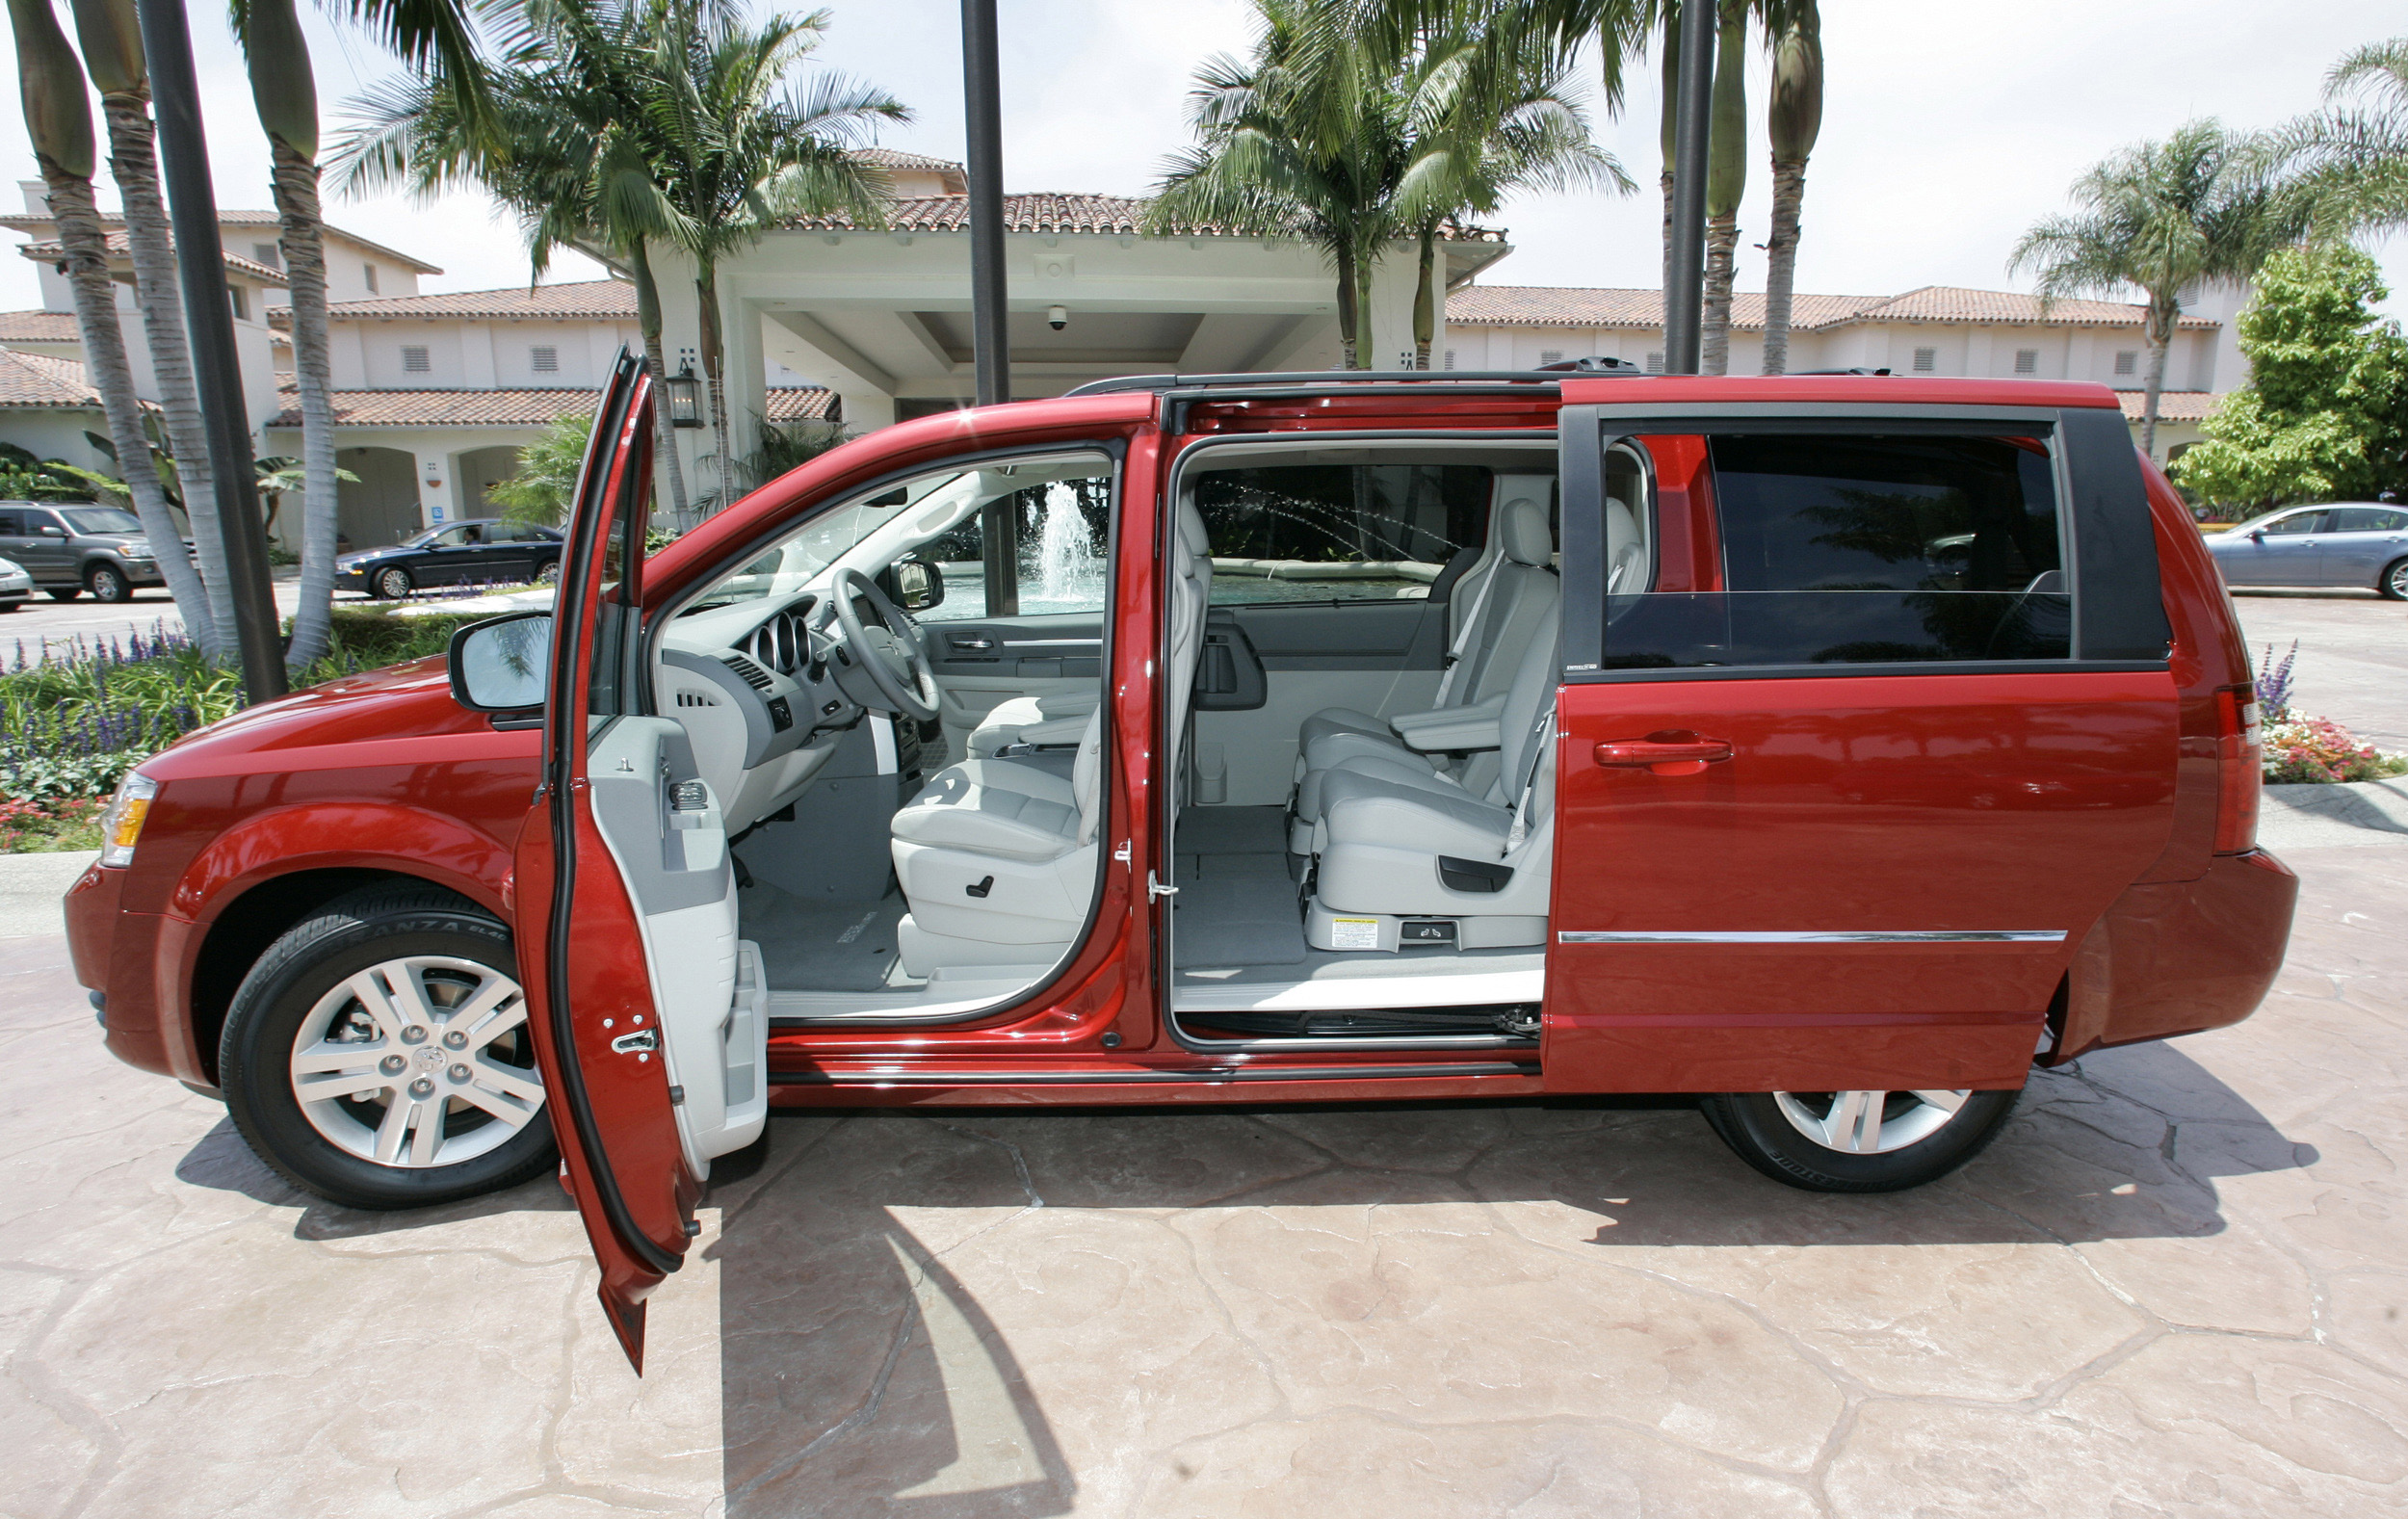 Chrysler recalling 367,000 minivans a second time over problem with air